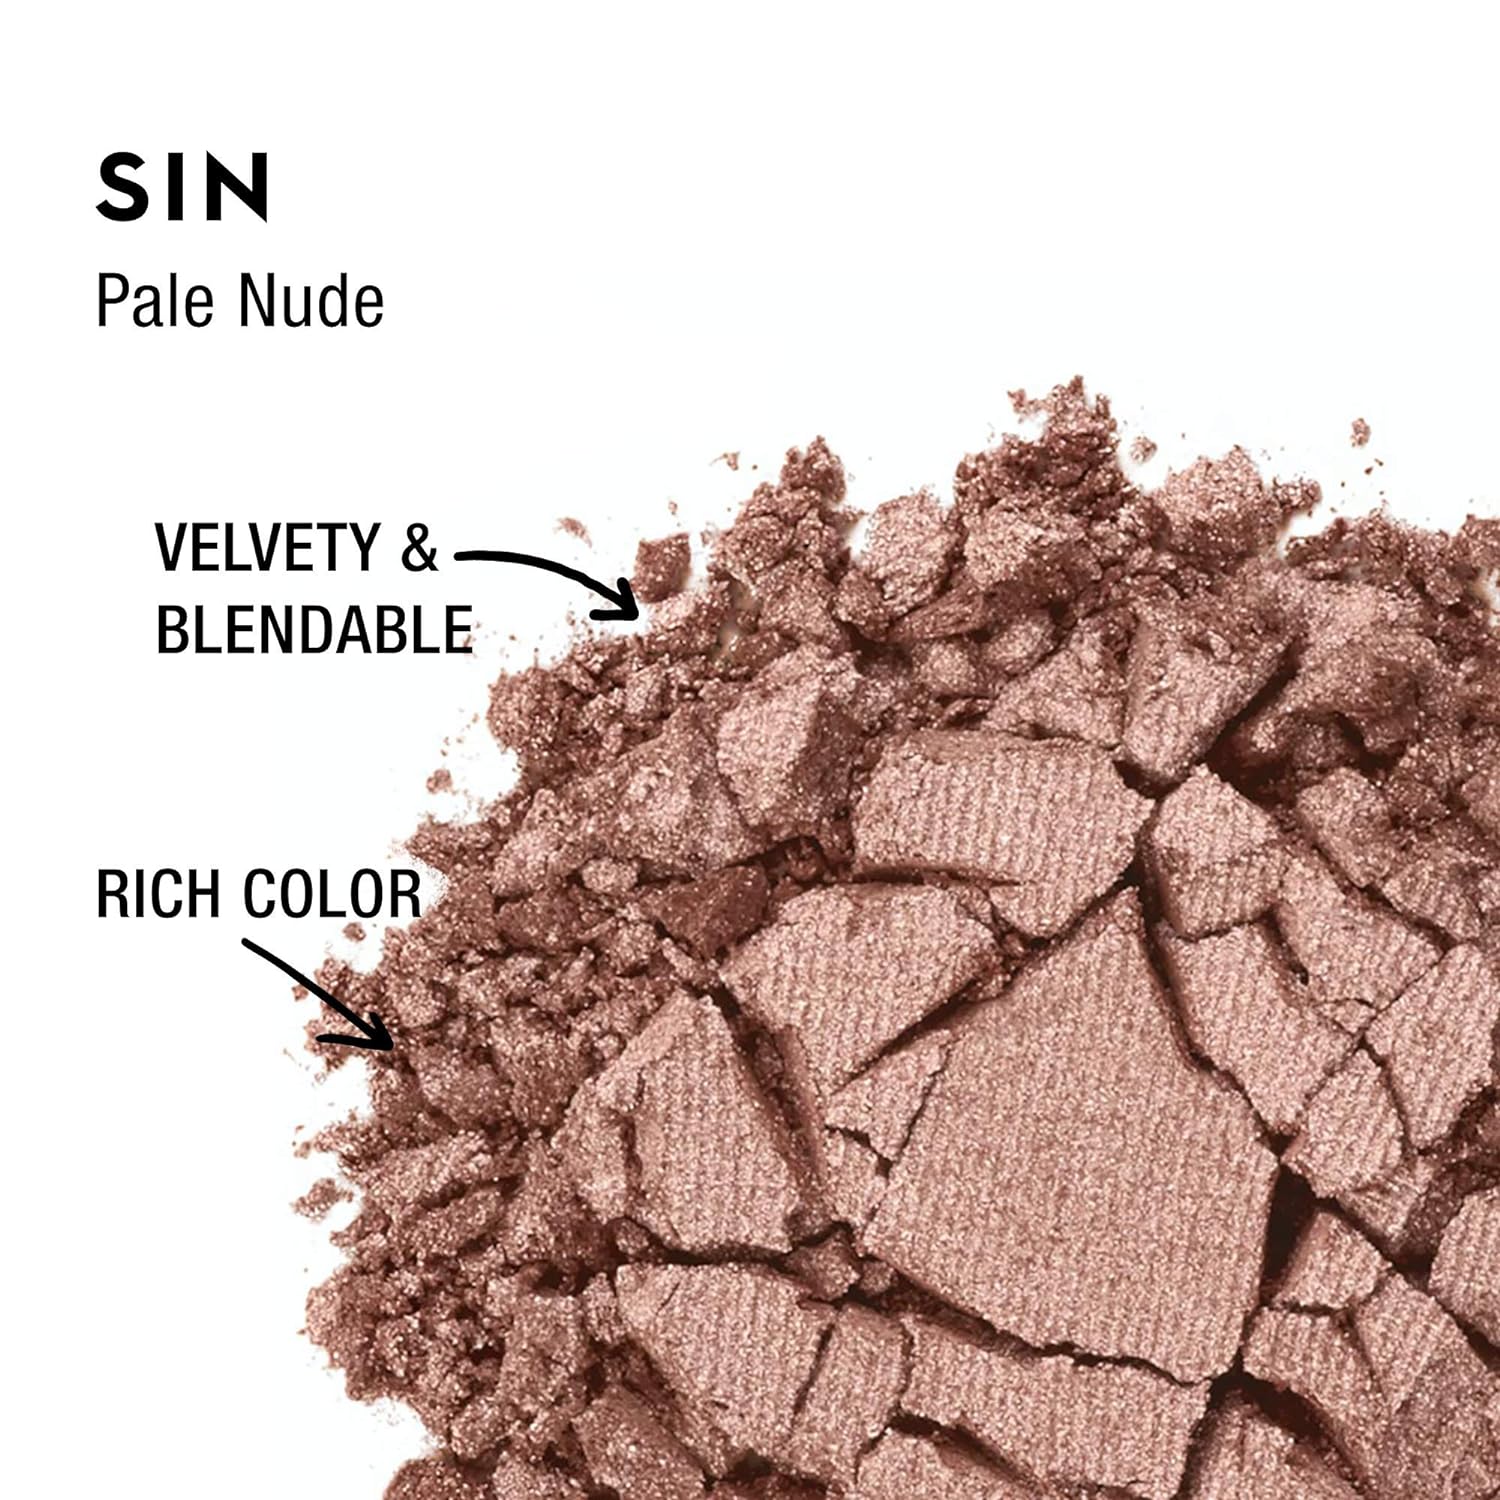  Urban Decay Eyeshadow Compact, Sin - Pale Nude - Shimmer Finish - Ultra-Blendable, Rich Color with Velvety Texture